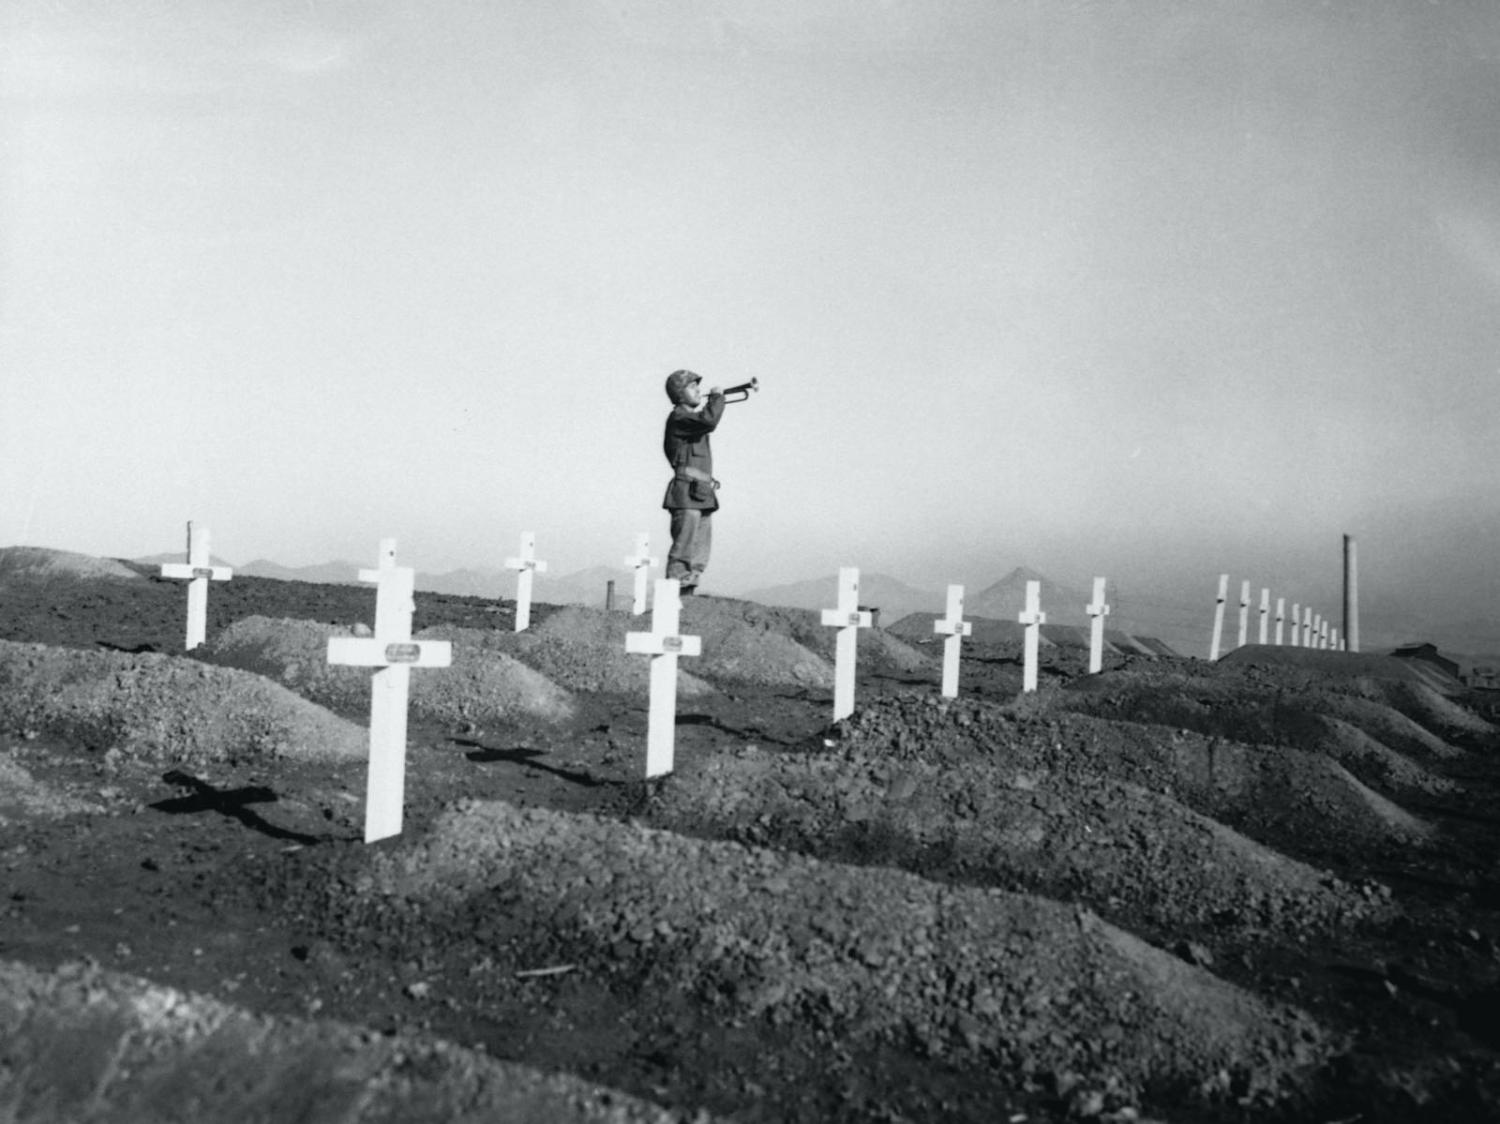 A memorial service on 13 December 1950 in Hungnam, Korea at the graves of fallen US Marines following the break-out from Chosin Reservoir (Corbis via Getty Images)